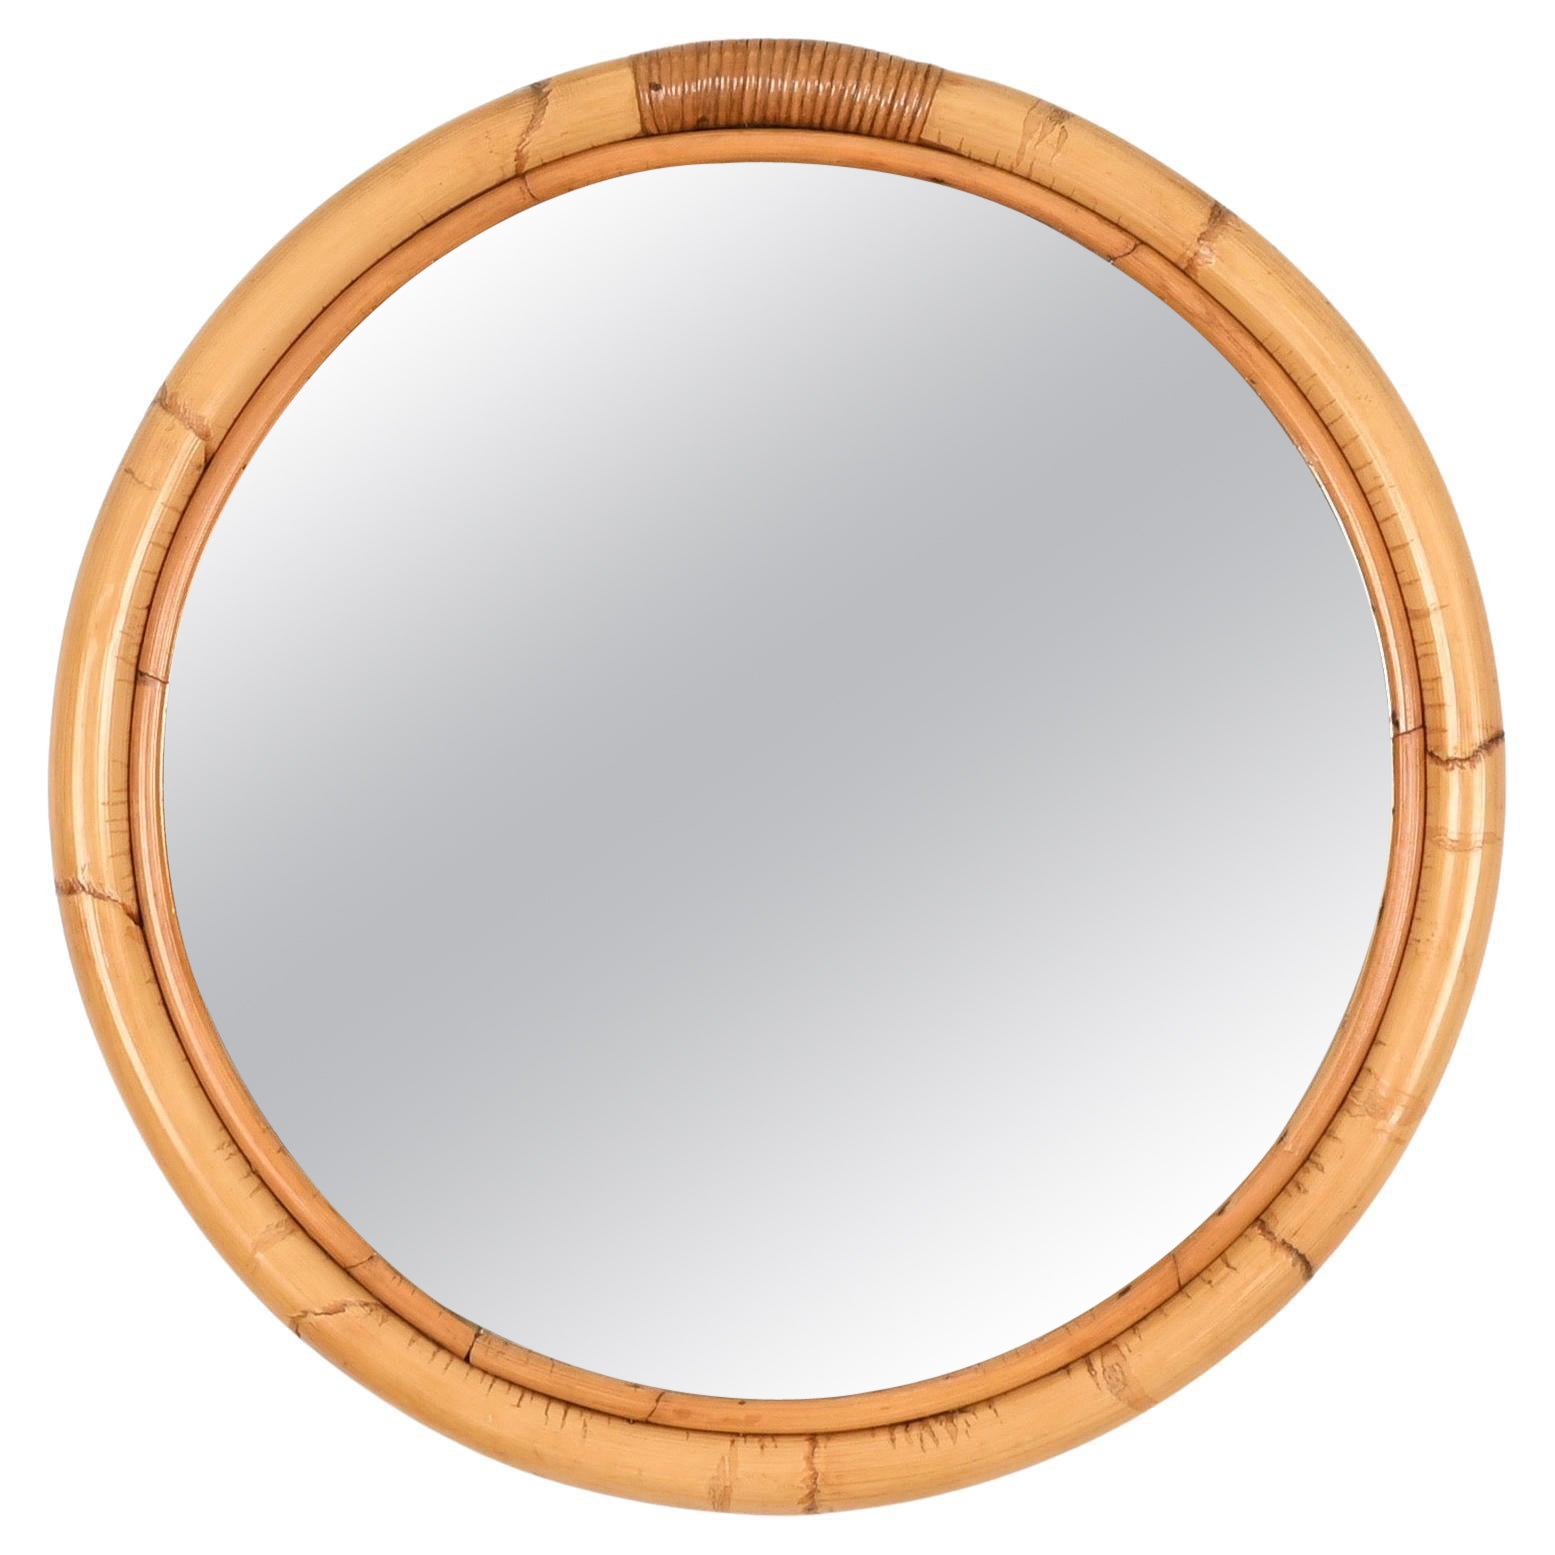 French Riviera Round Mirror with Double Rattan Frame and Wicker, Italy 1970s For Sale